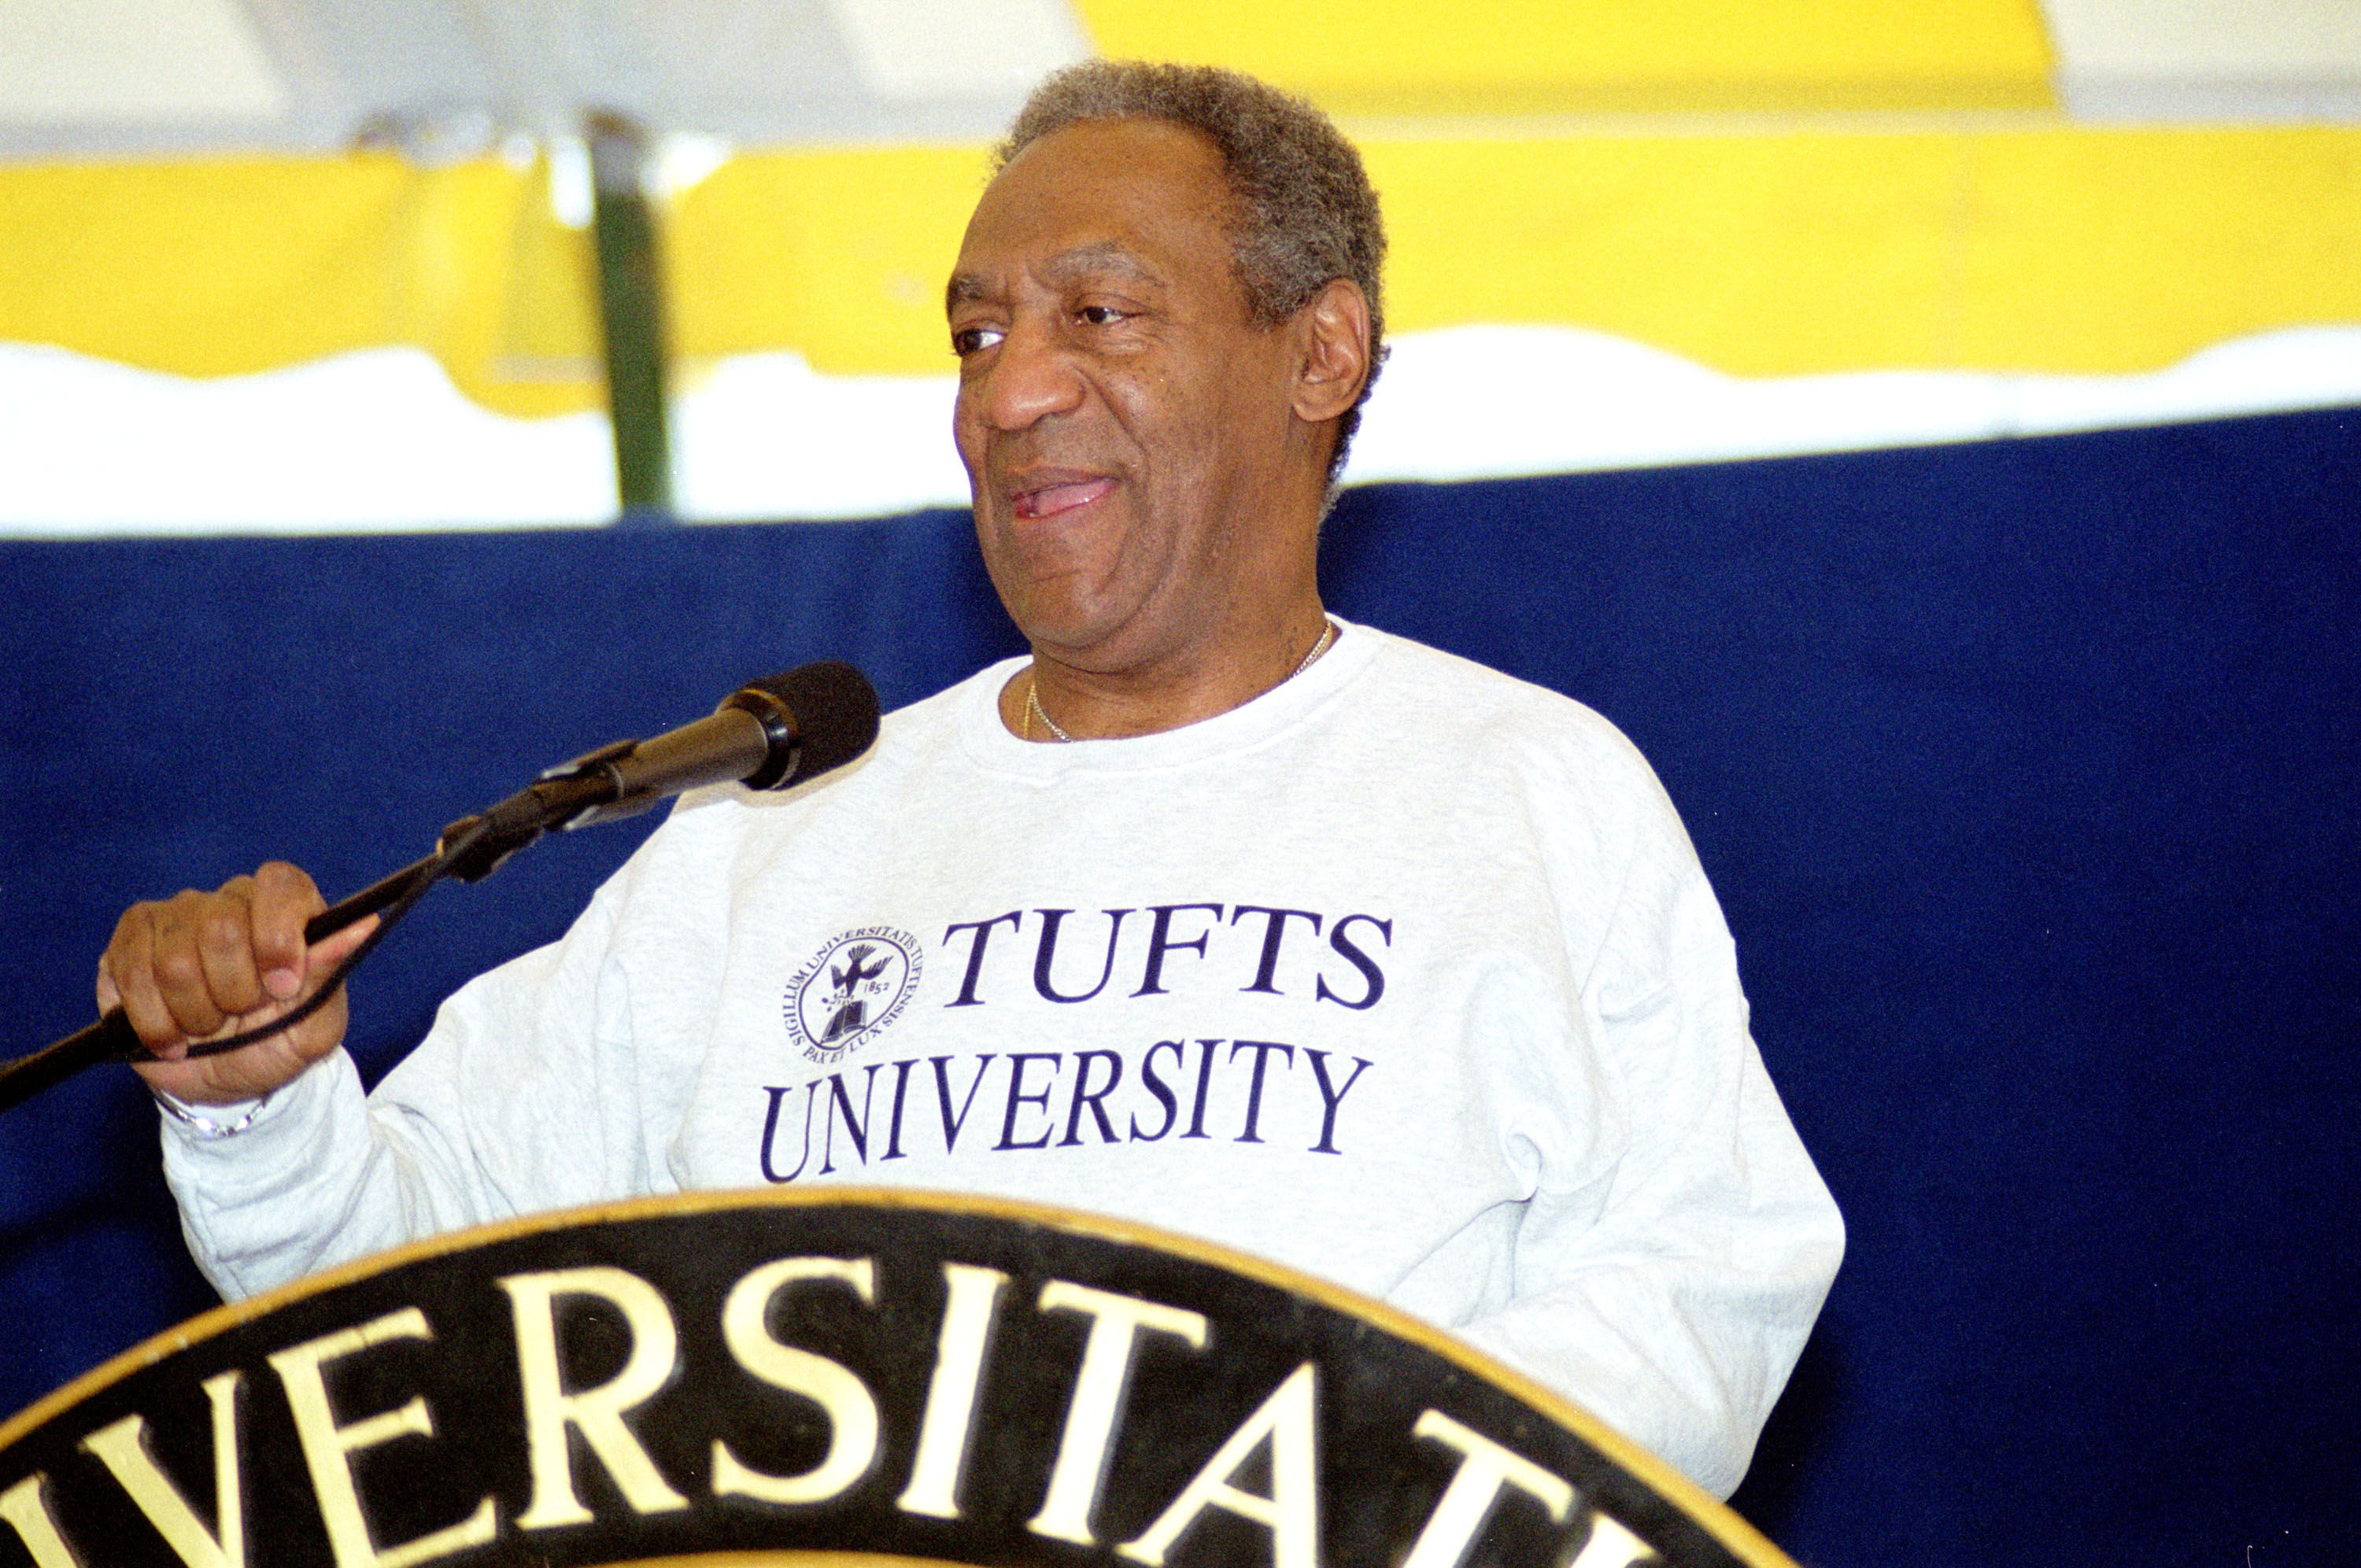 Comedian Bill Cosby speaks to graduates on May 21, 2000 after receiving an honorary degree from Tufts University in Medford, MA. (Jacob Silberberg—Getty Images)